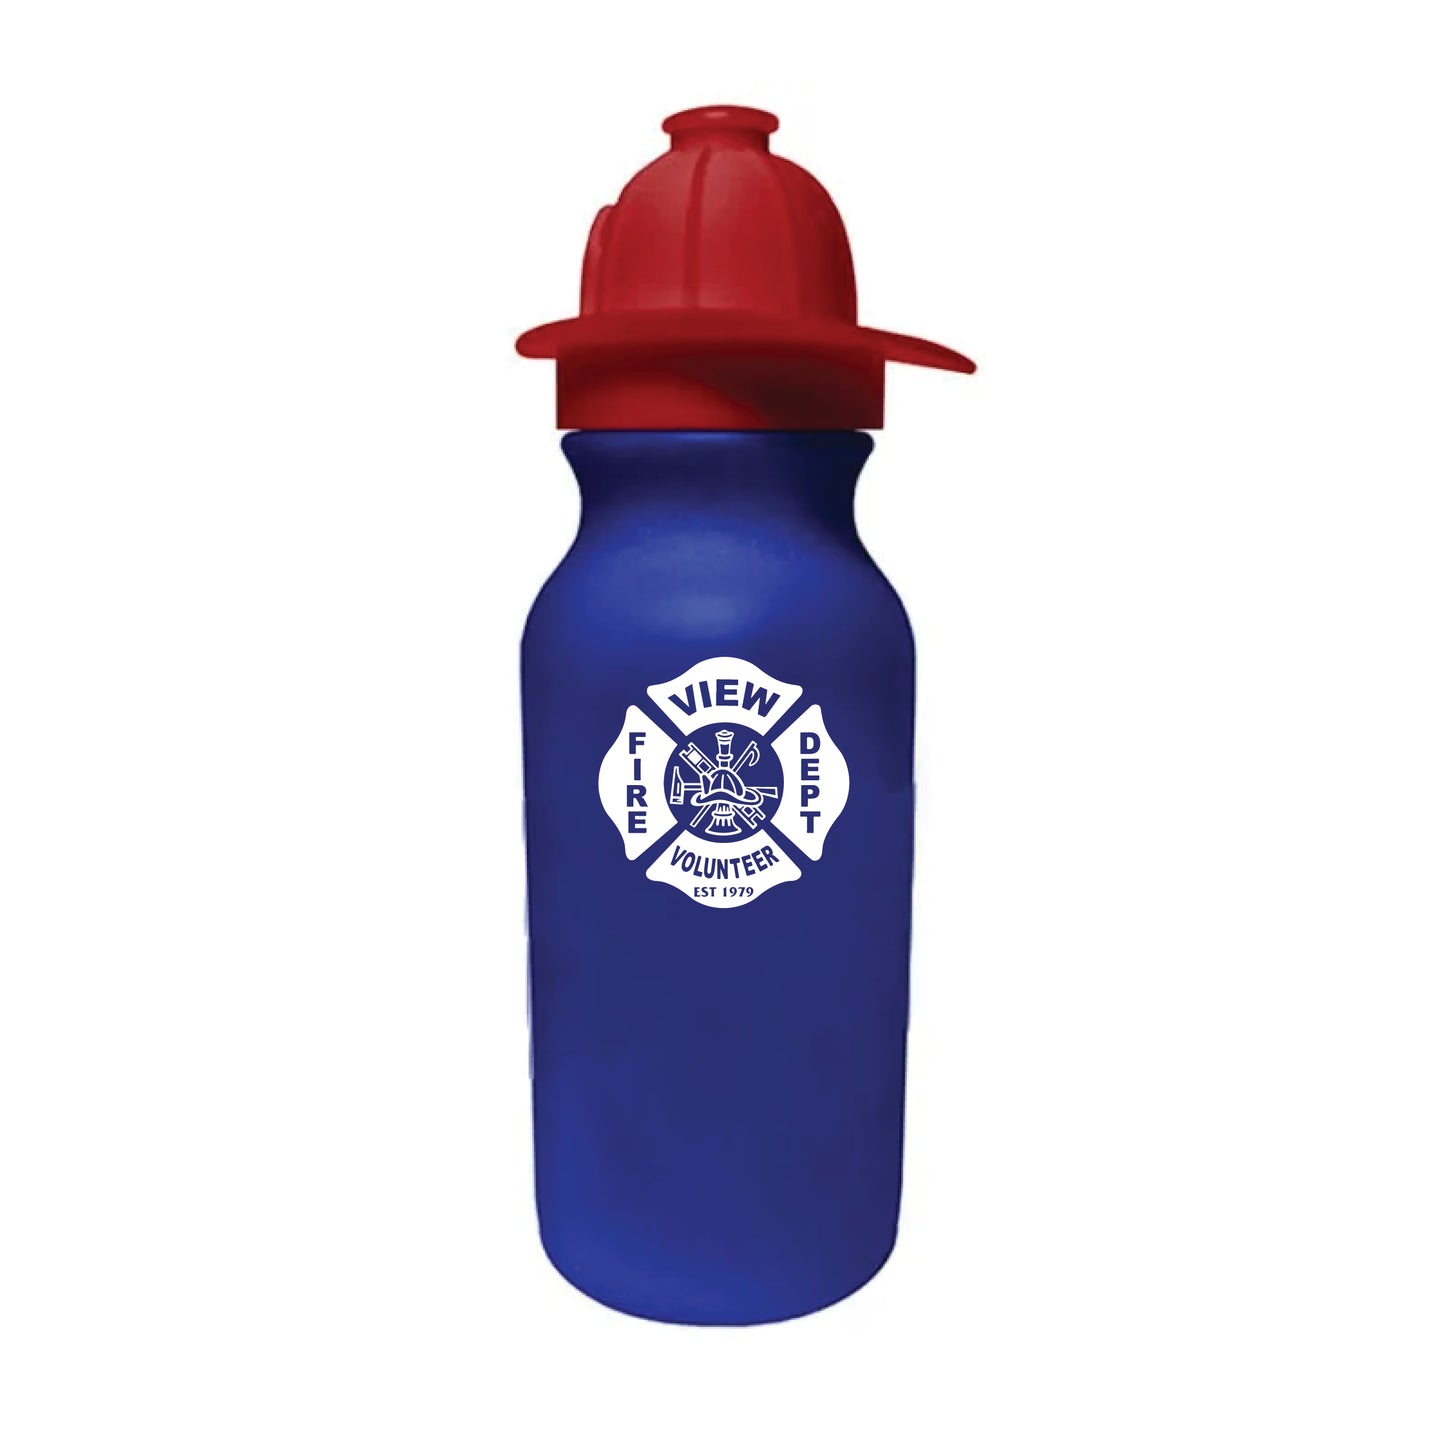 Cycle Bottle With Firefighter Helmet